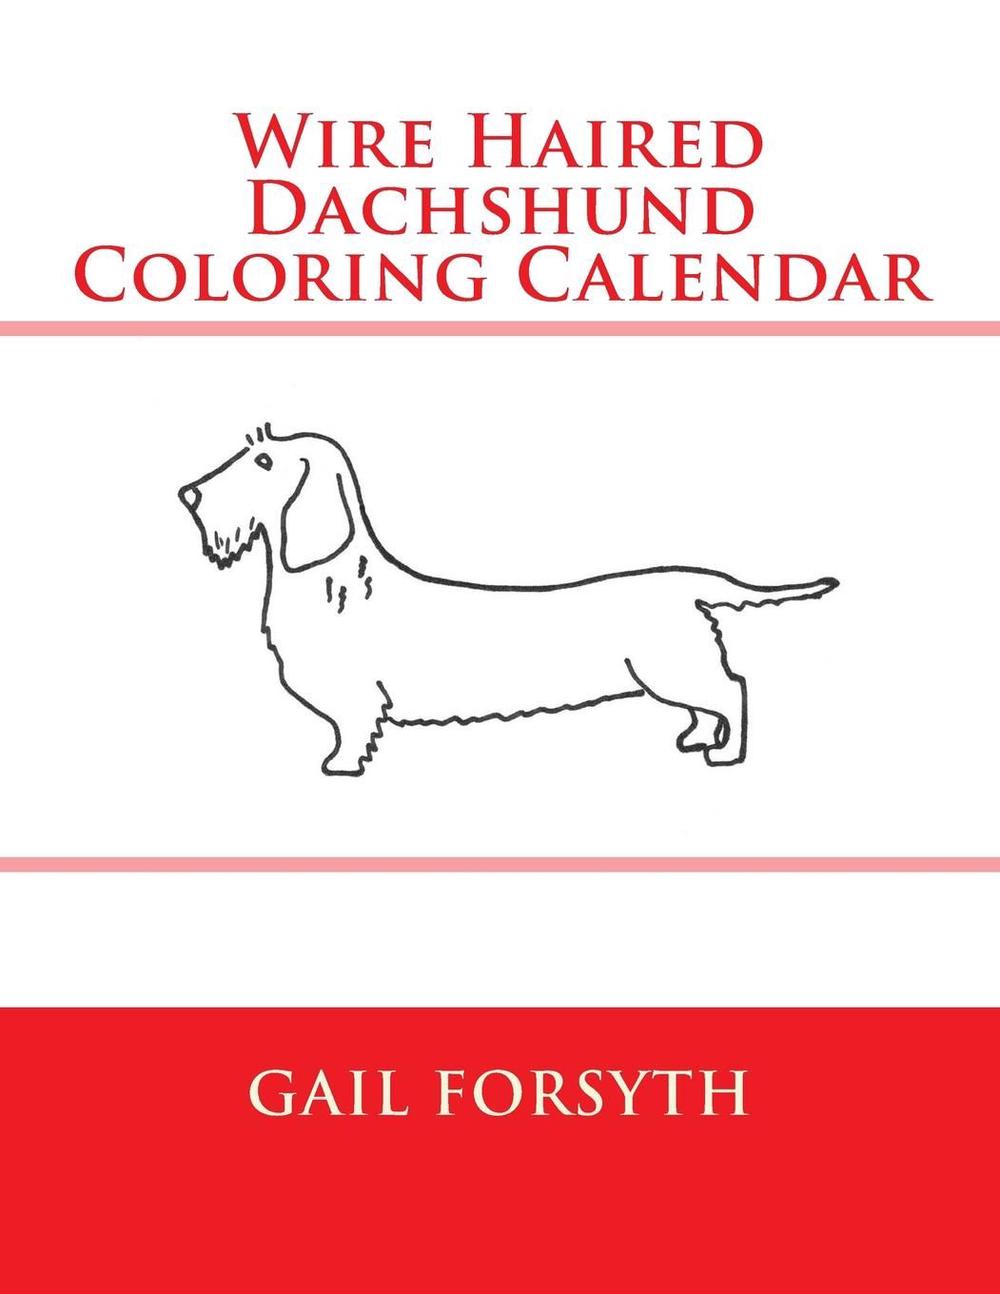 Download Wire Haired Dachshund Coloring Calendar by Gail Forsyth (English) Paperback Book 9781502994776 ...